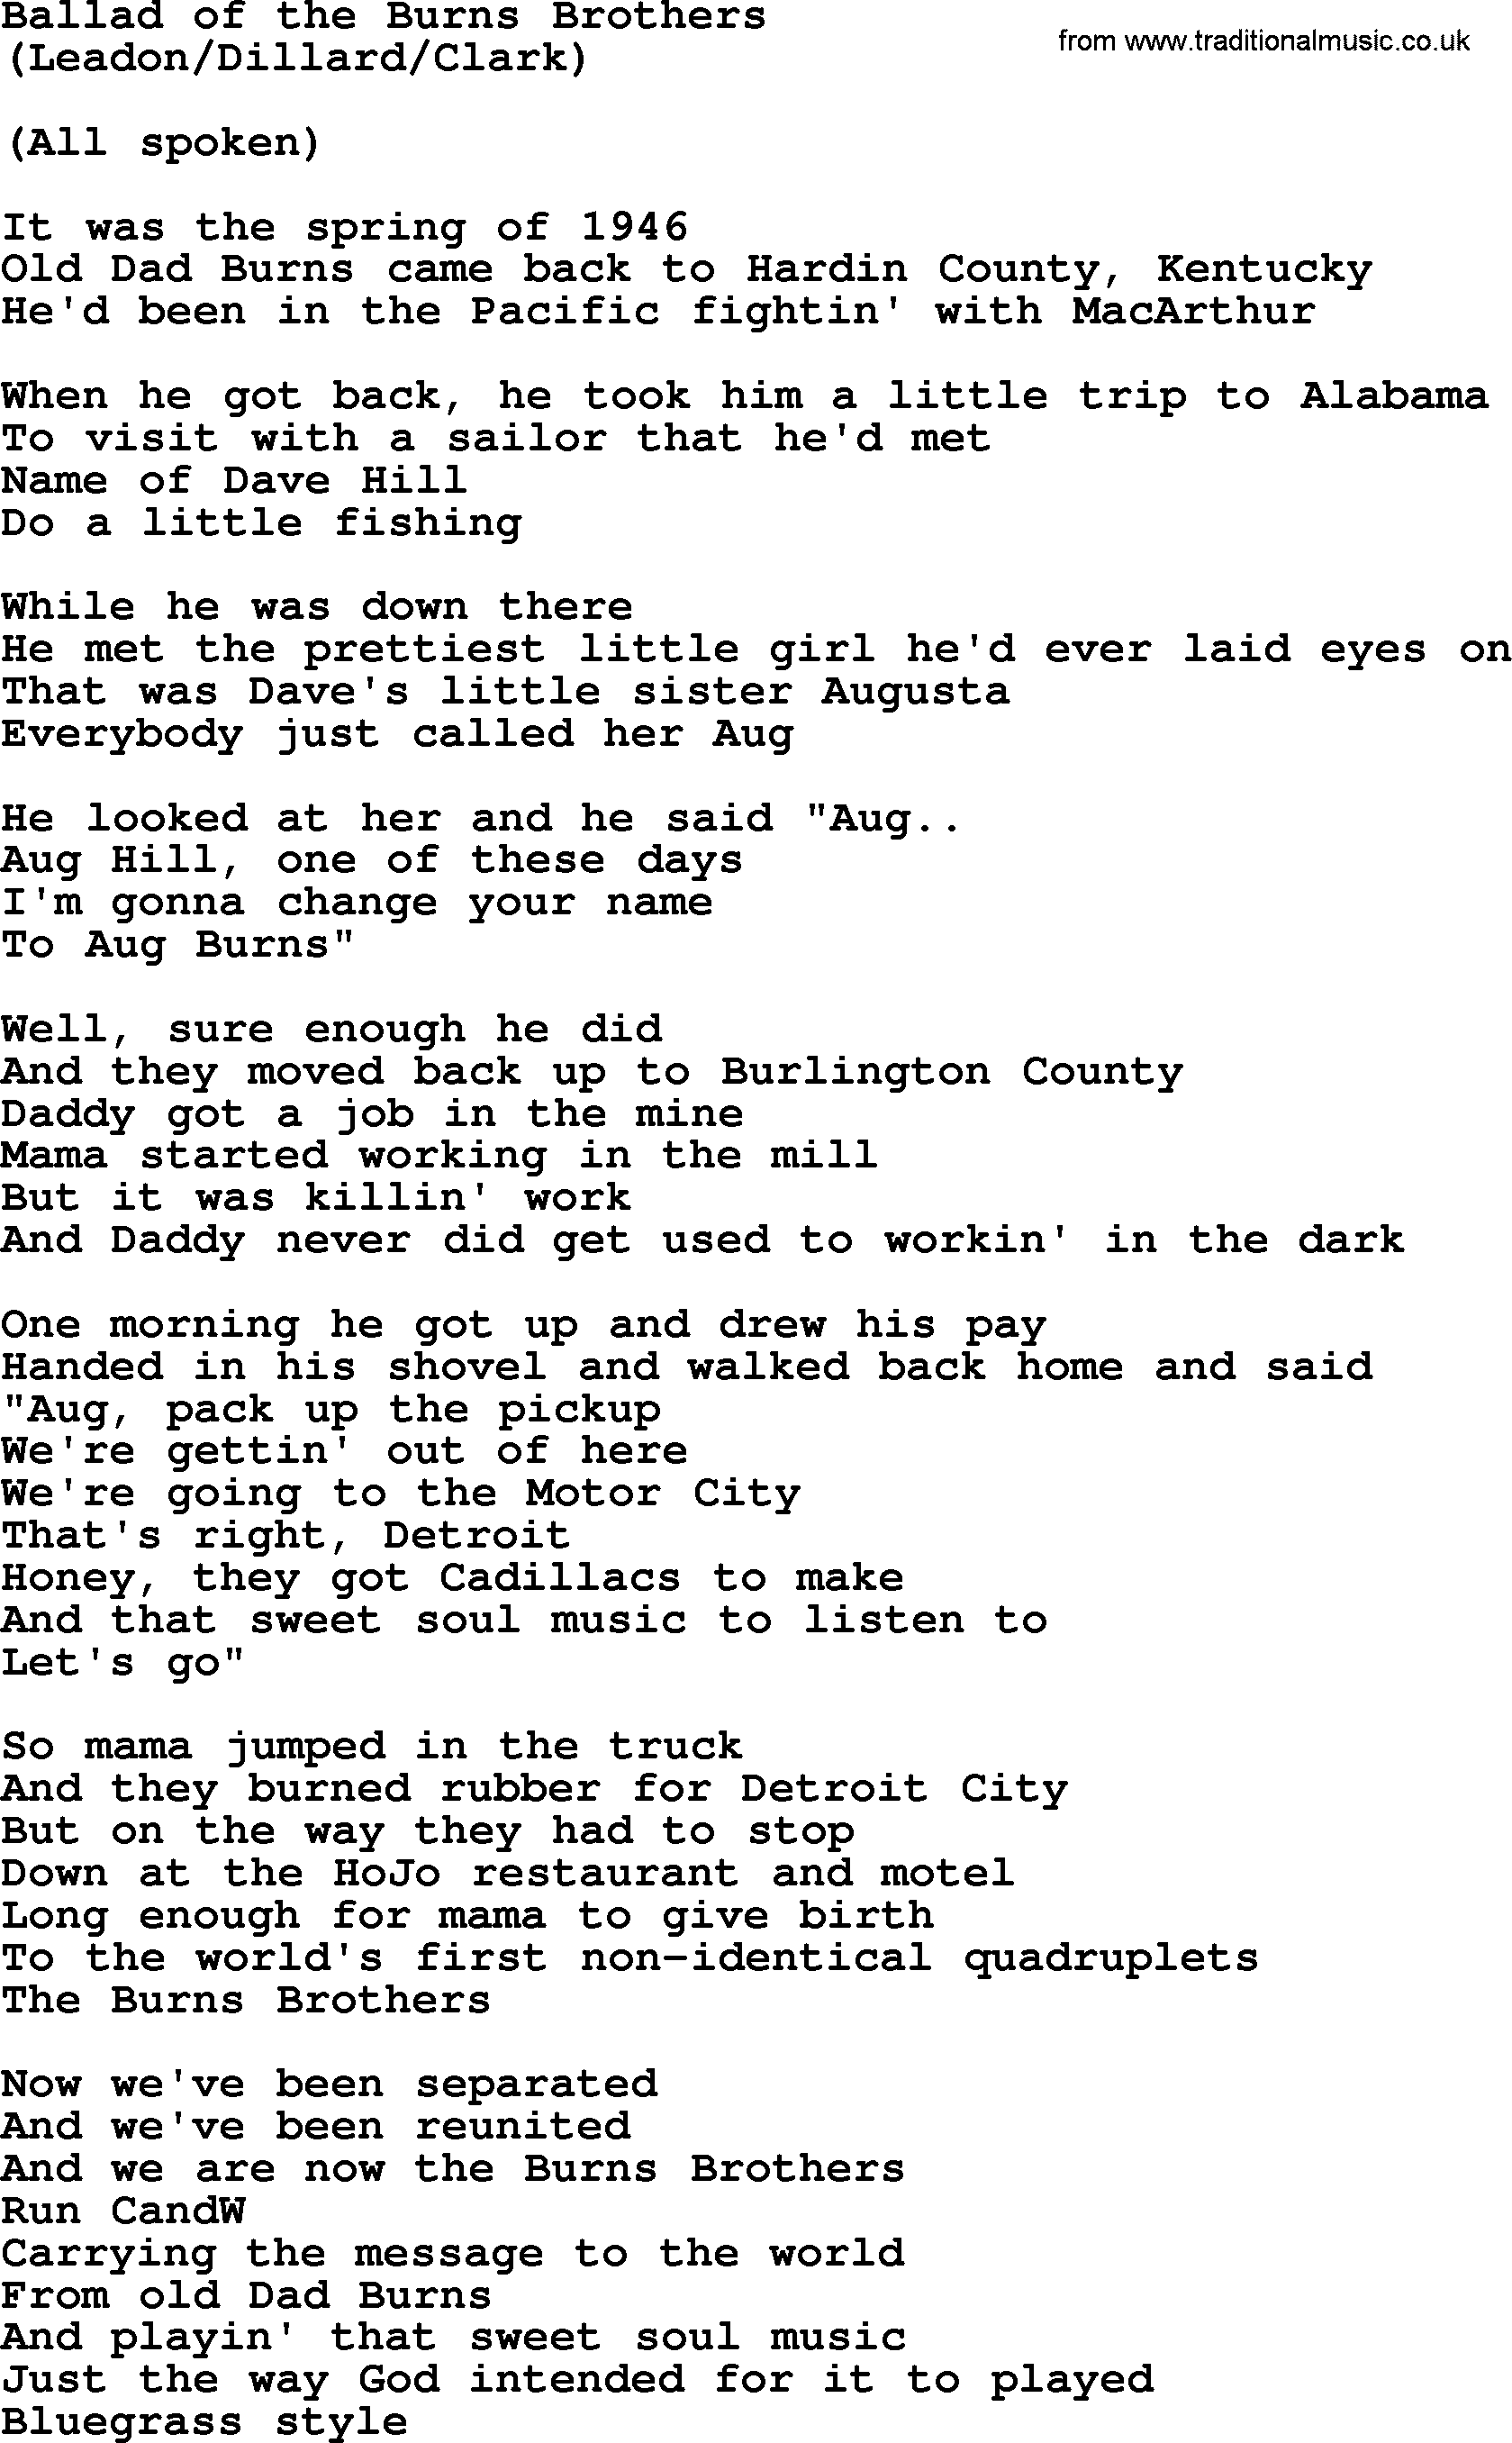 The Byrds song Ballad Of The Burns Brothers, lyrics